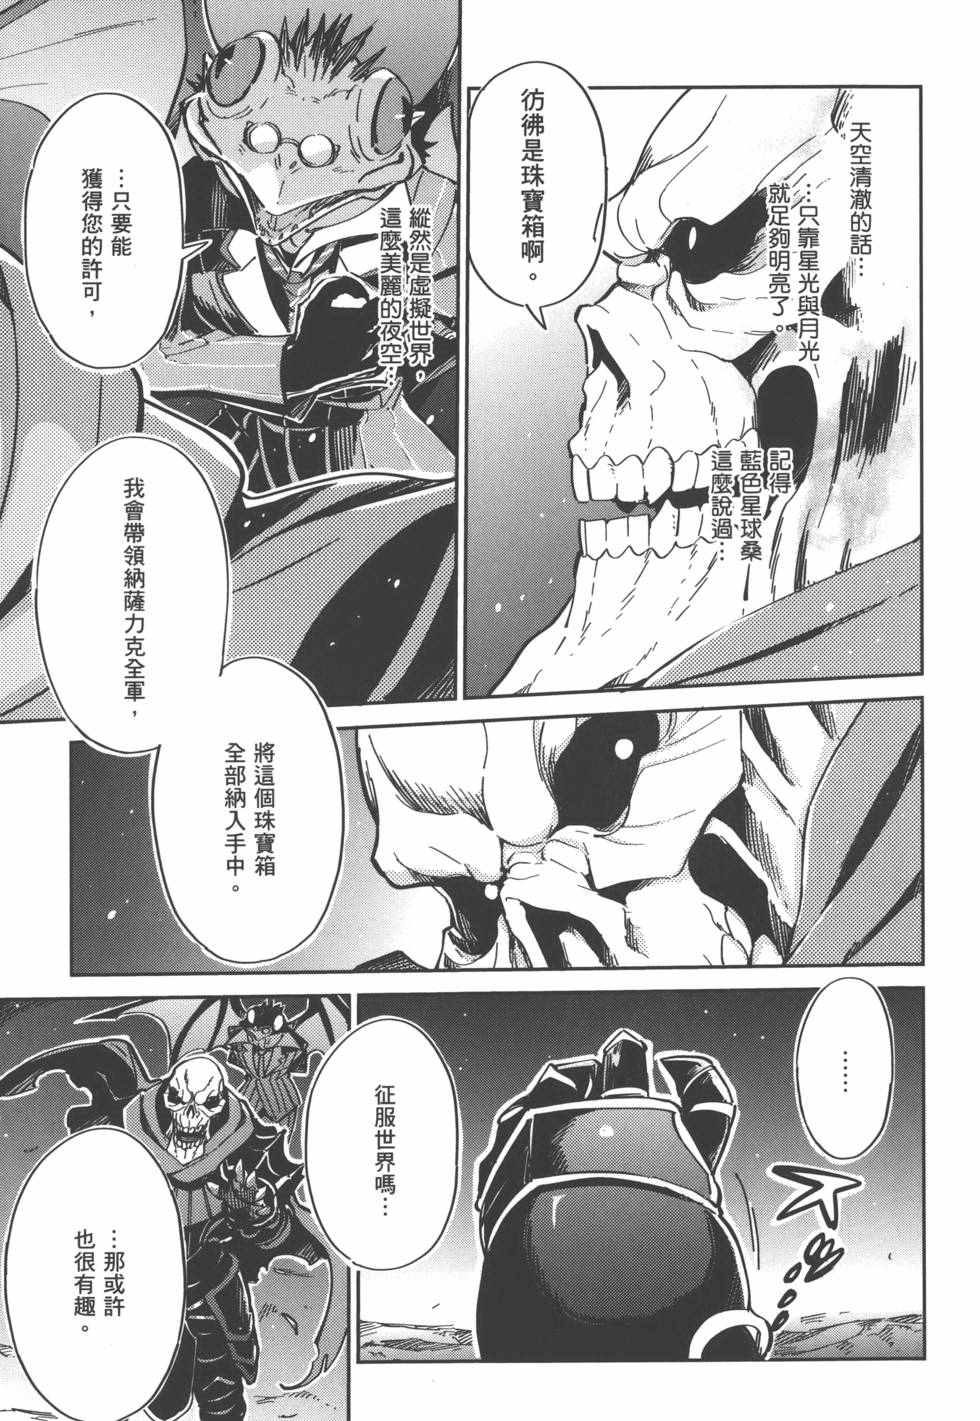 OVERLORD - 第1卷(2/4) - 5